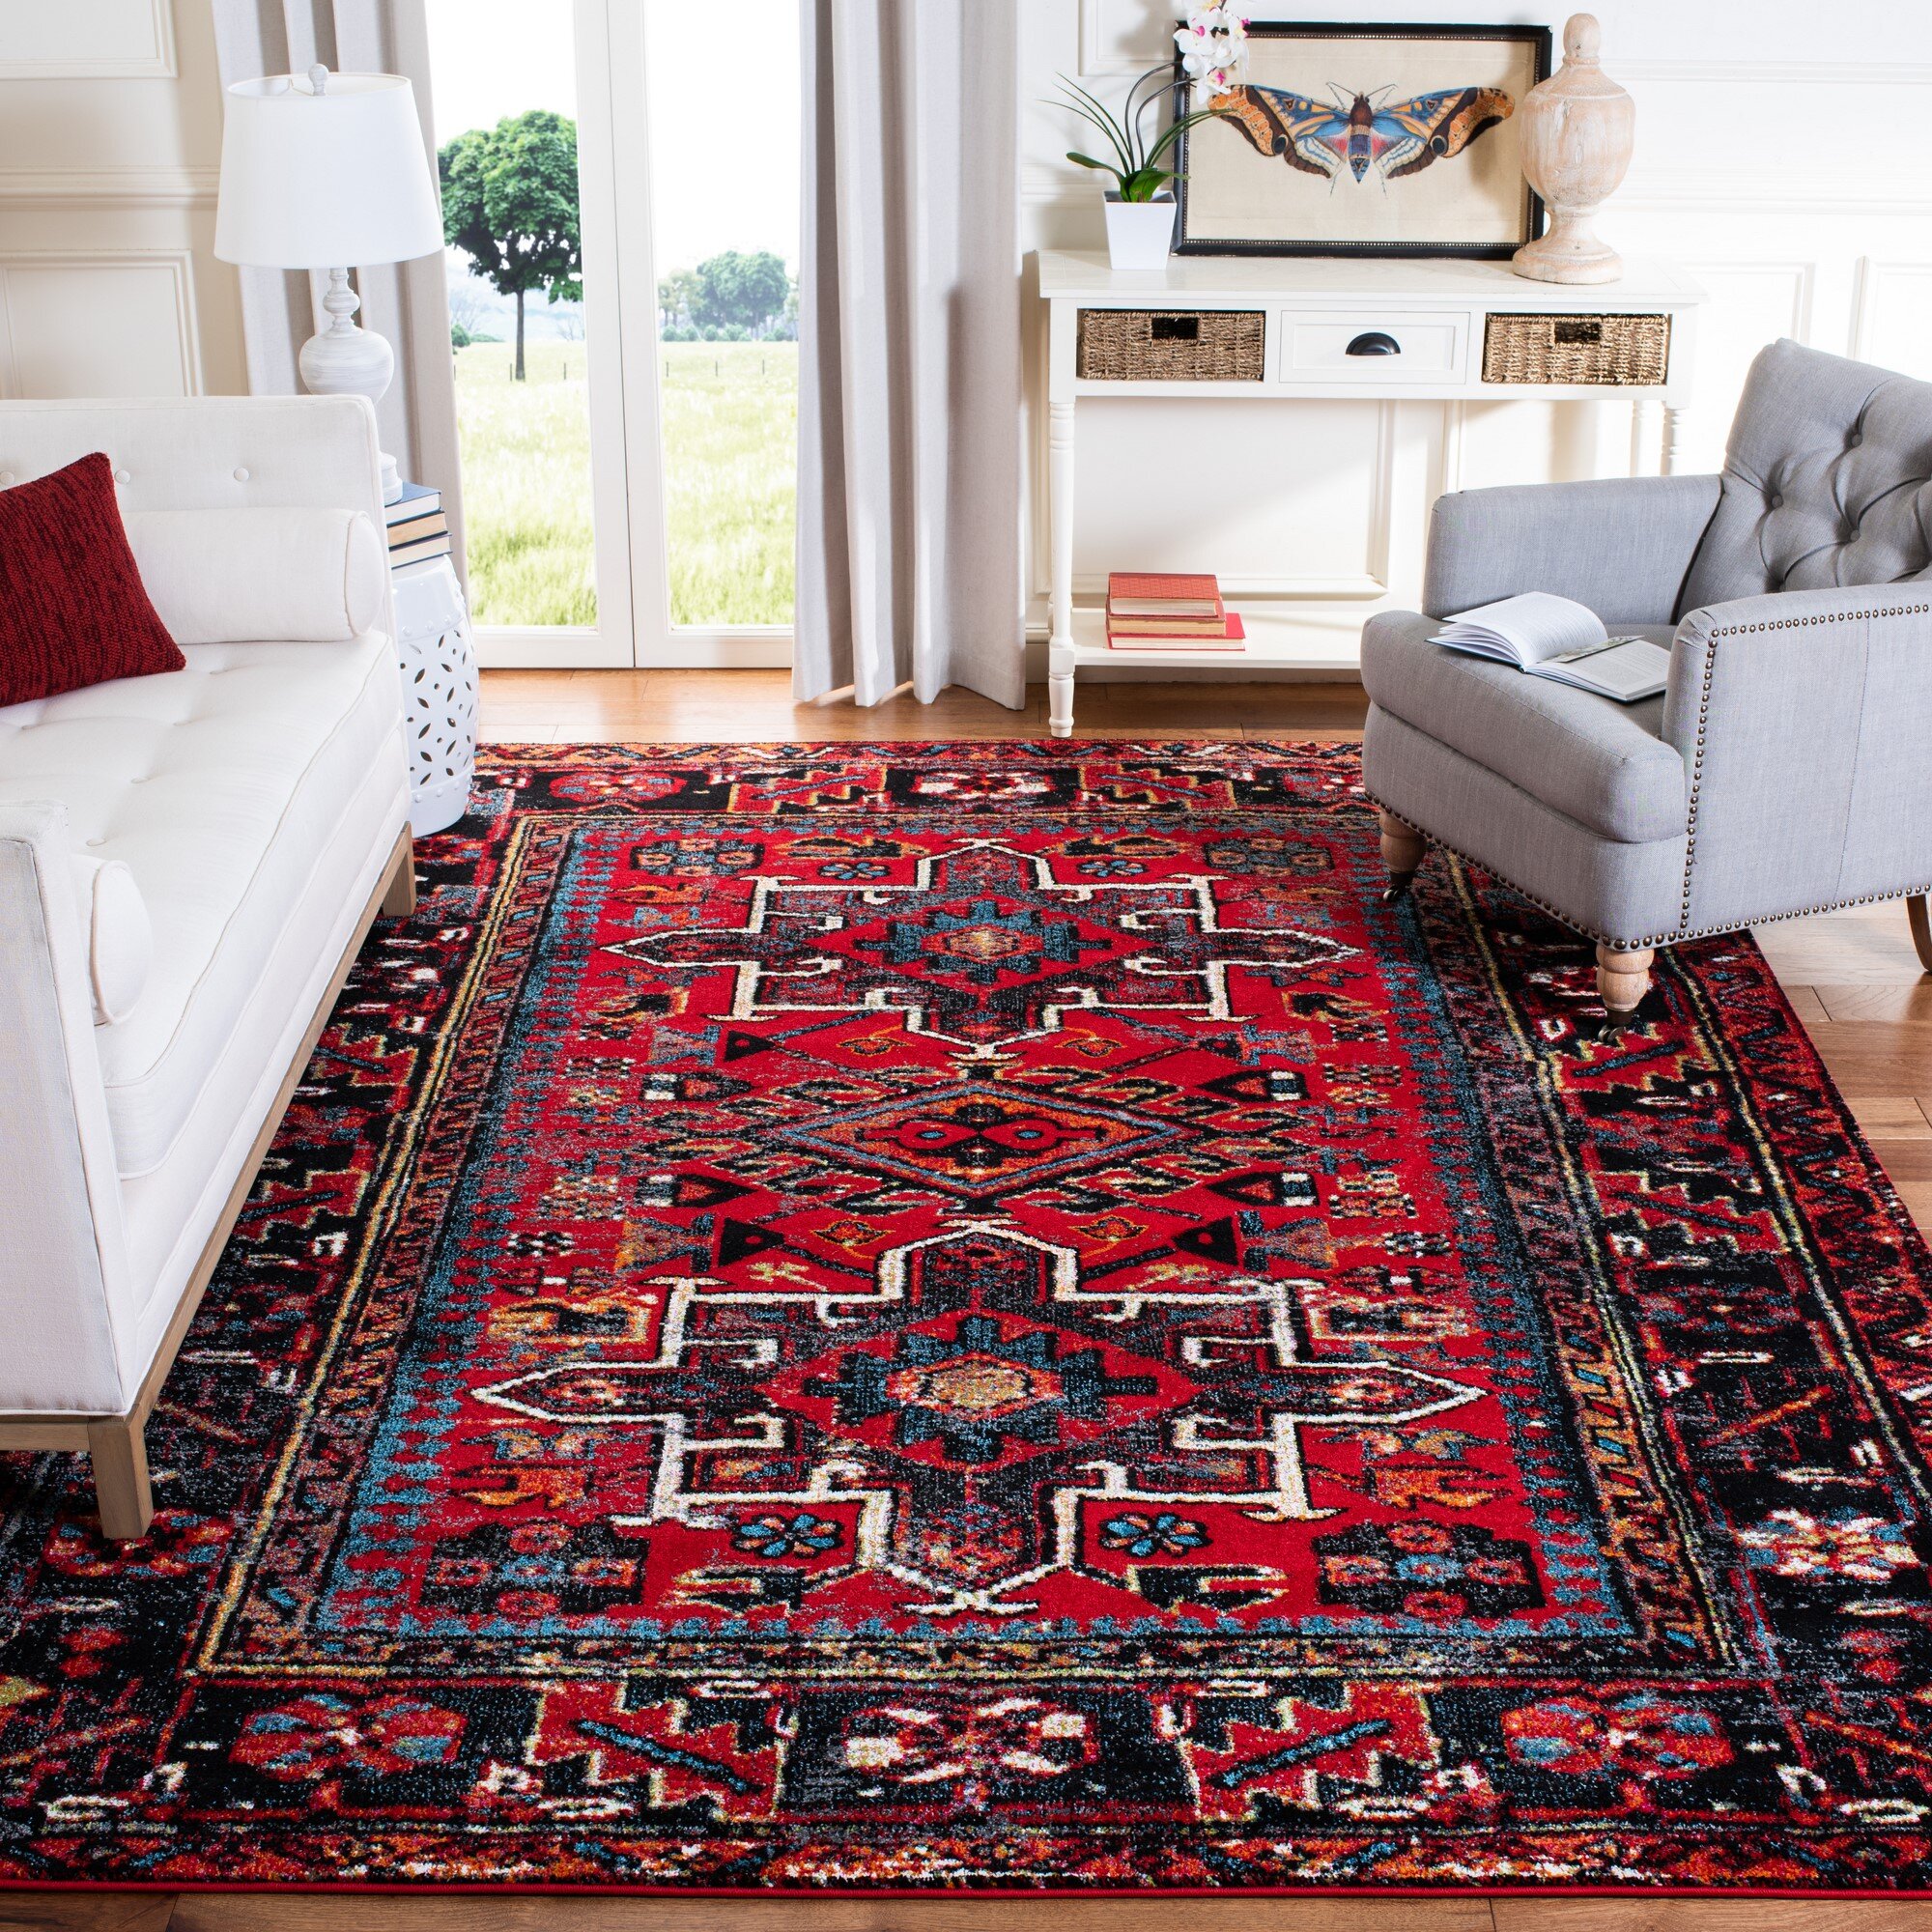 Large Classic Vintage Area Rugs For Living Room Small Medium Large Rug Carpet 